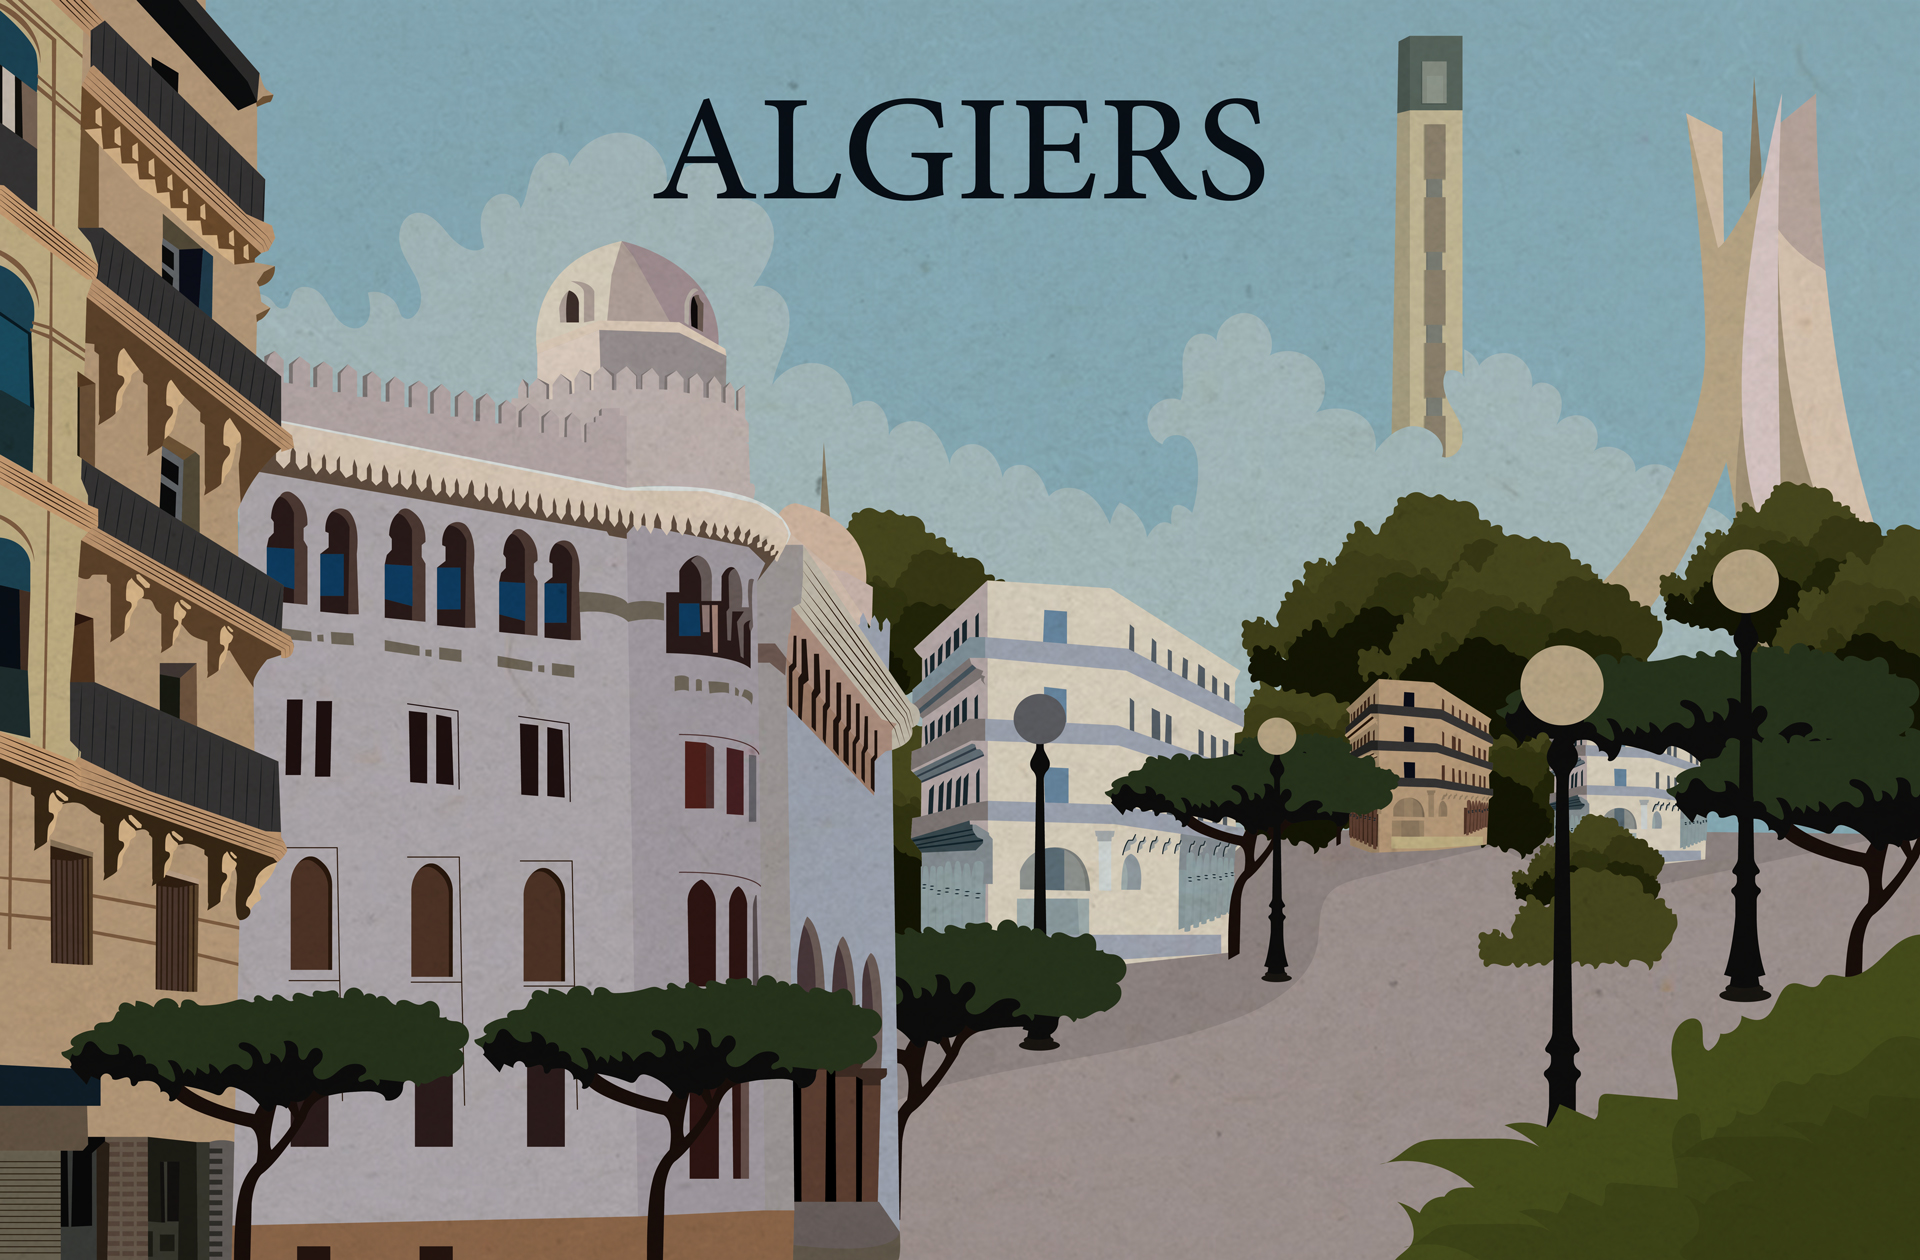 algiers vintage poster with text